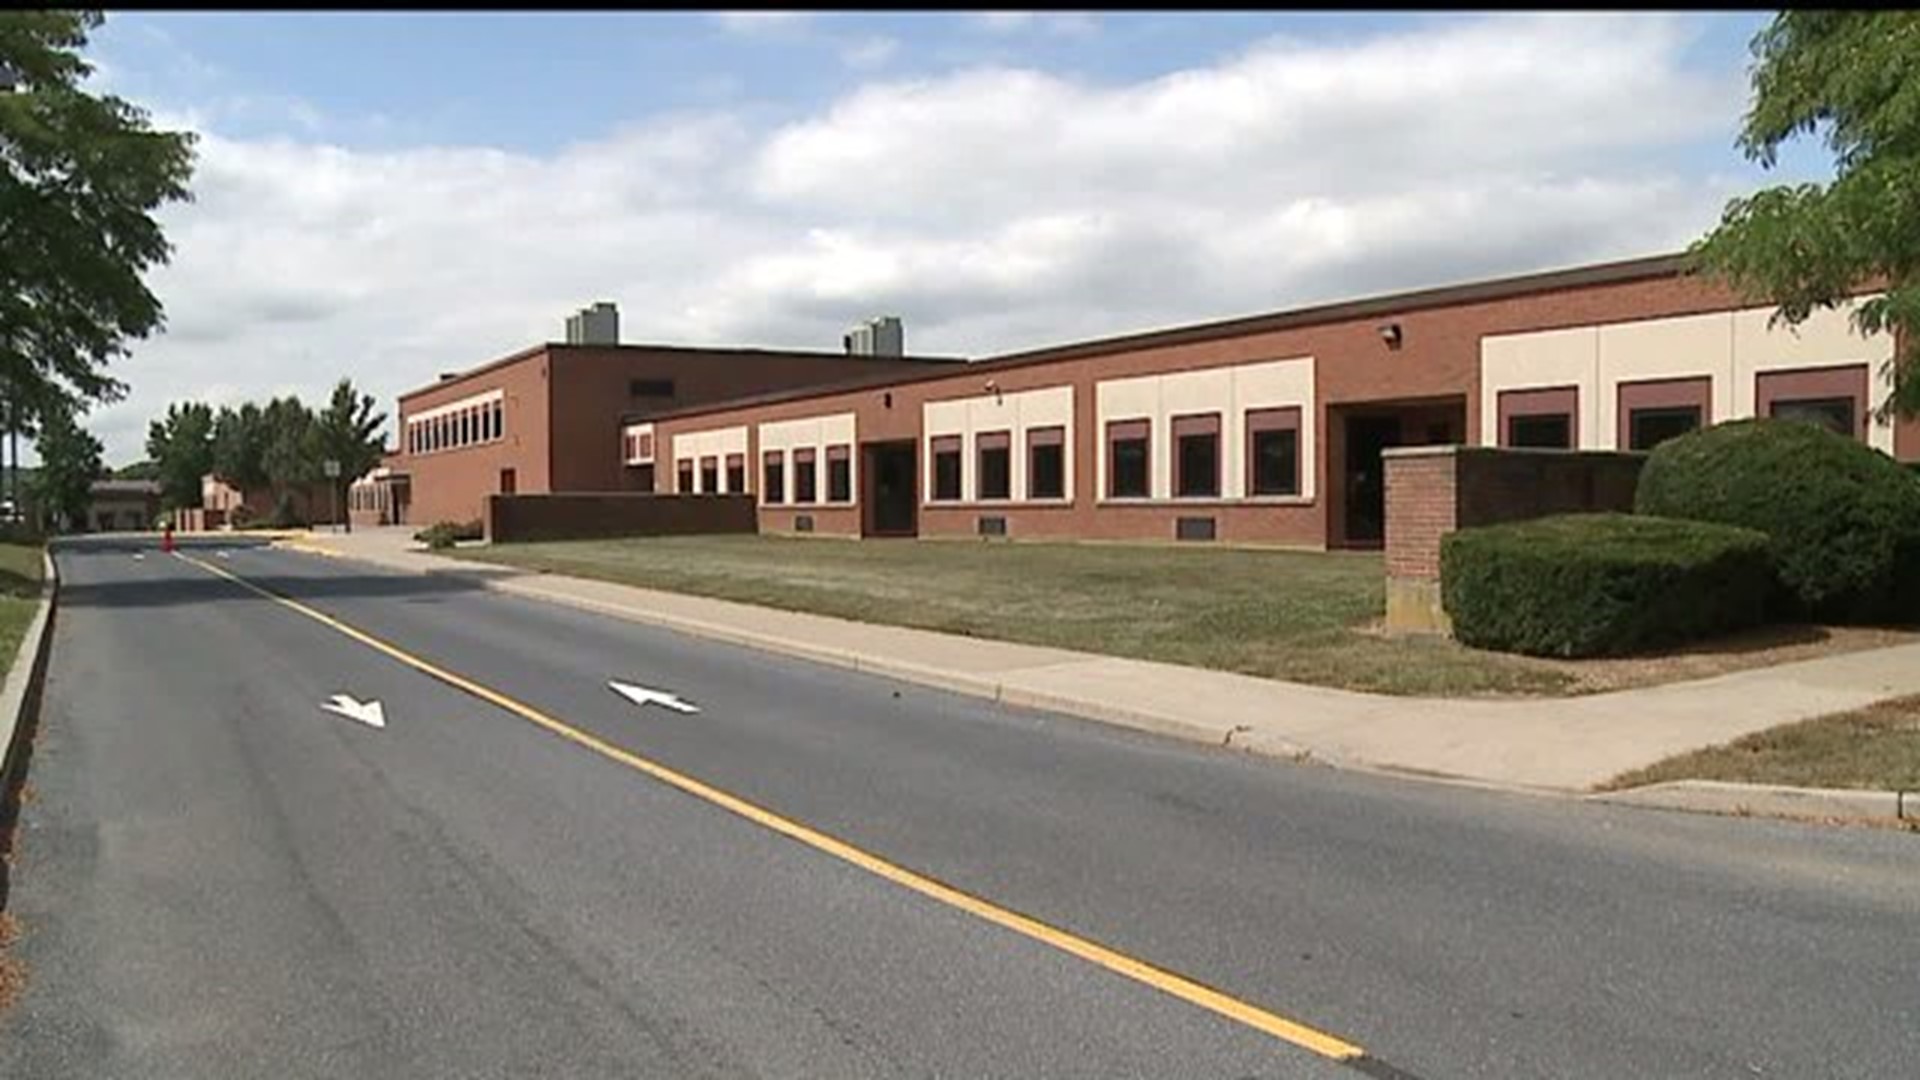 derry township school district taxes sent out